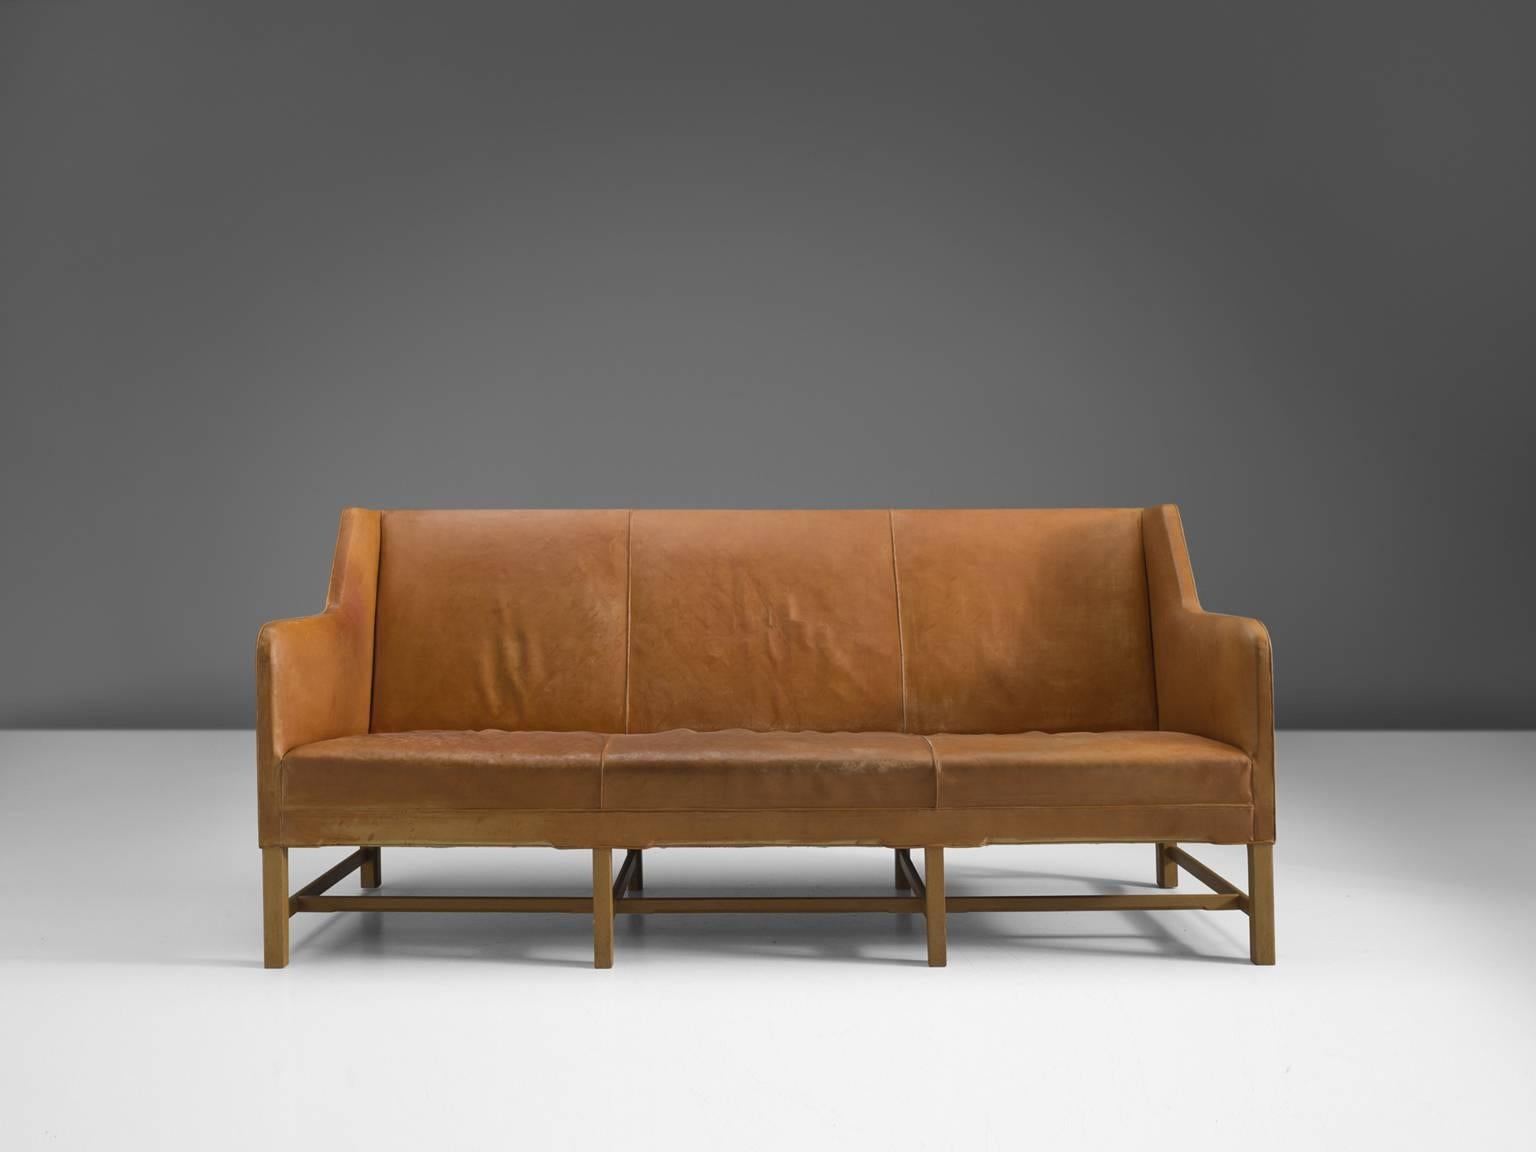 Sofa model 5011, in leather and oak, by Kaare Klint for Rud Rasmussen, Denmark 1935. 

Classic and elegant Scandinavian three-seat sofa by Kaare Klint. This model was designed in 1935. The base consists of eight legs in oak with cross-connections,